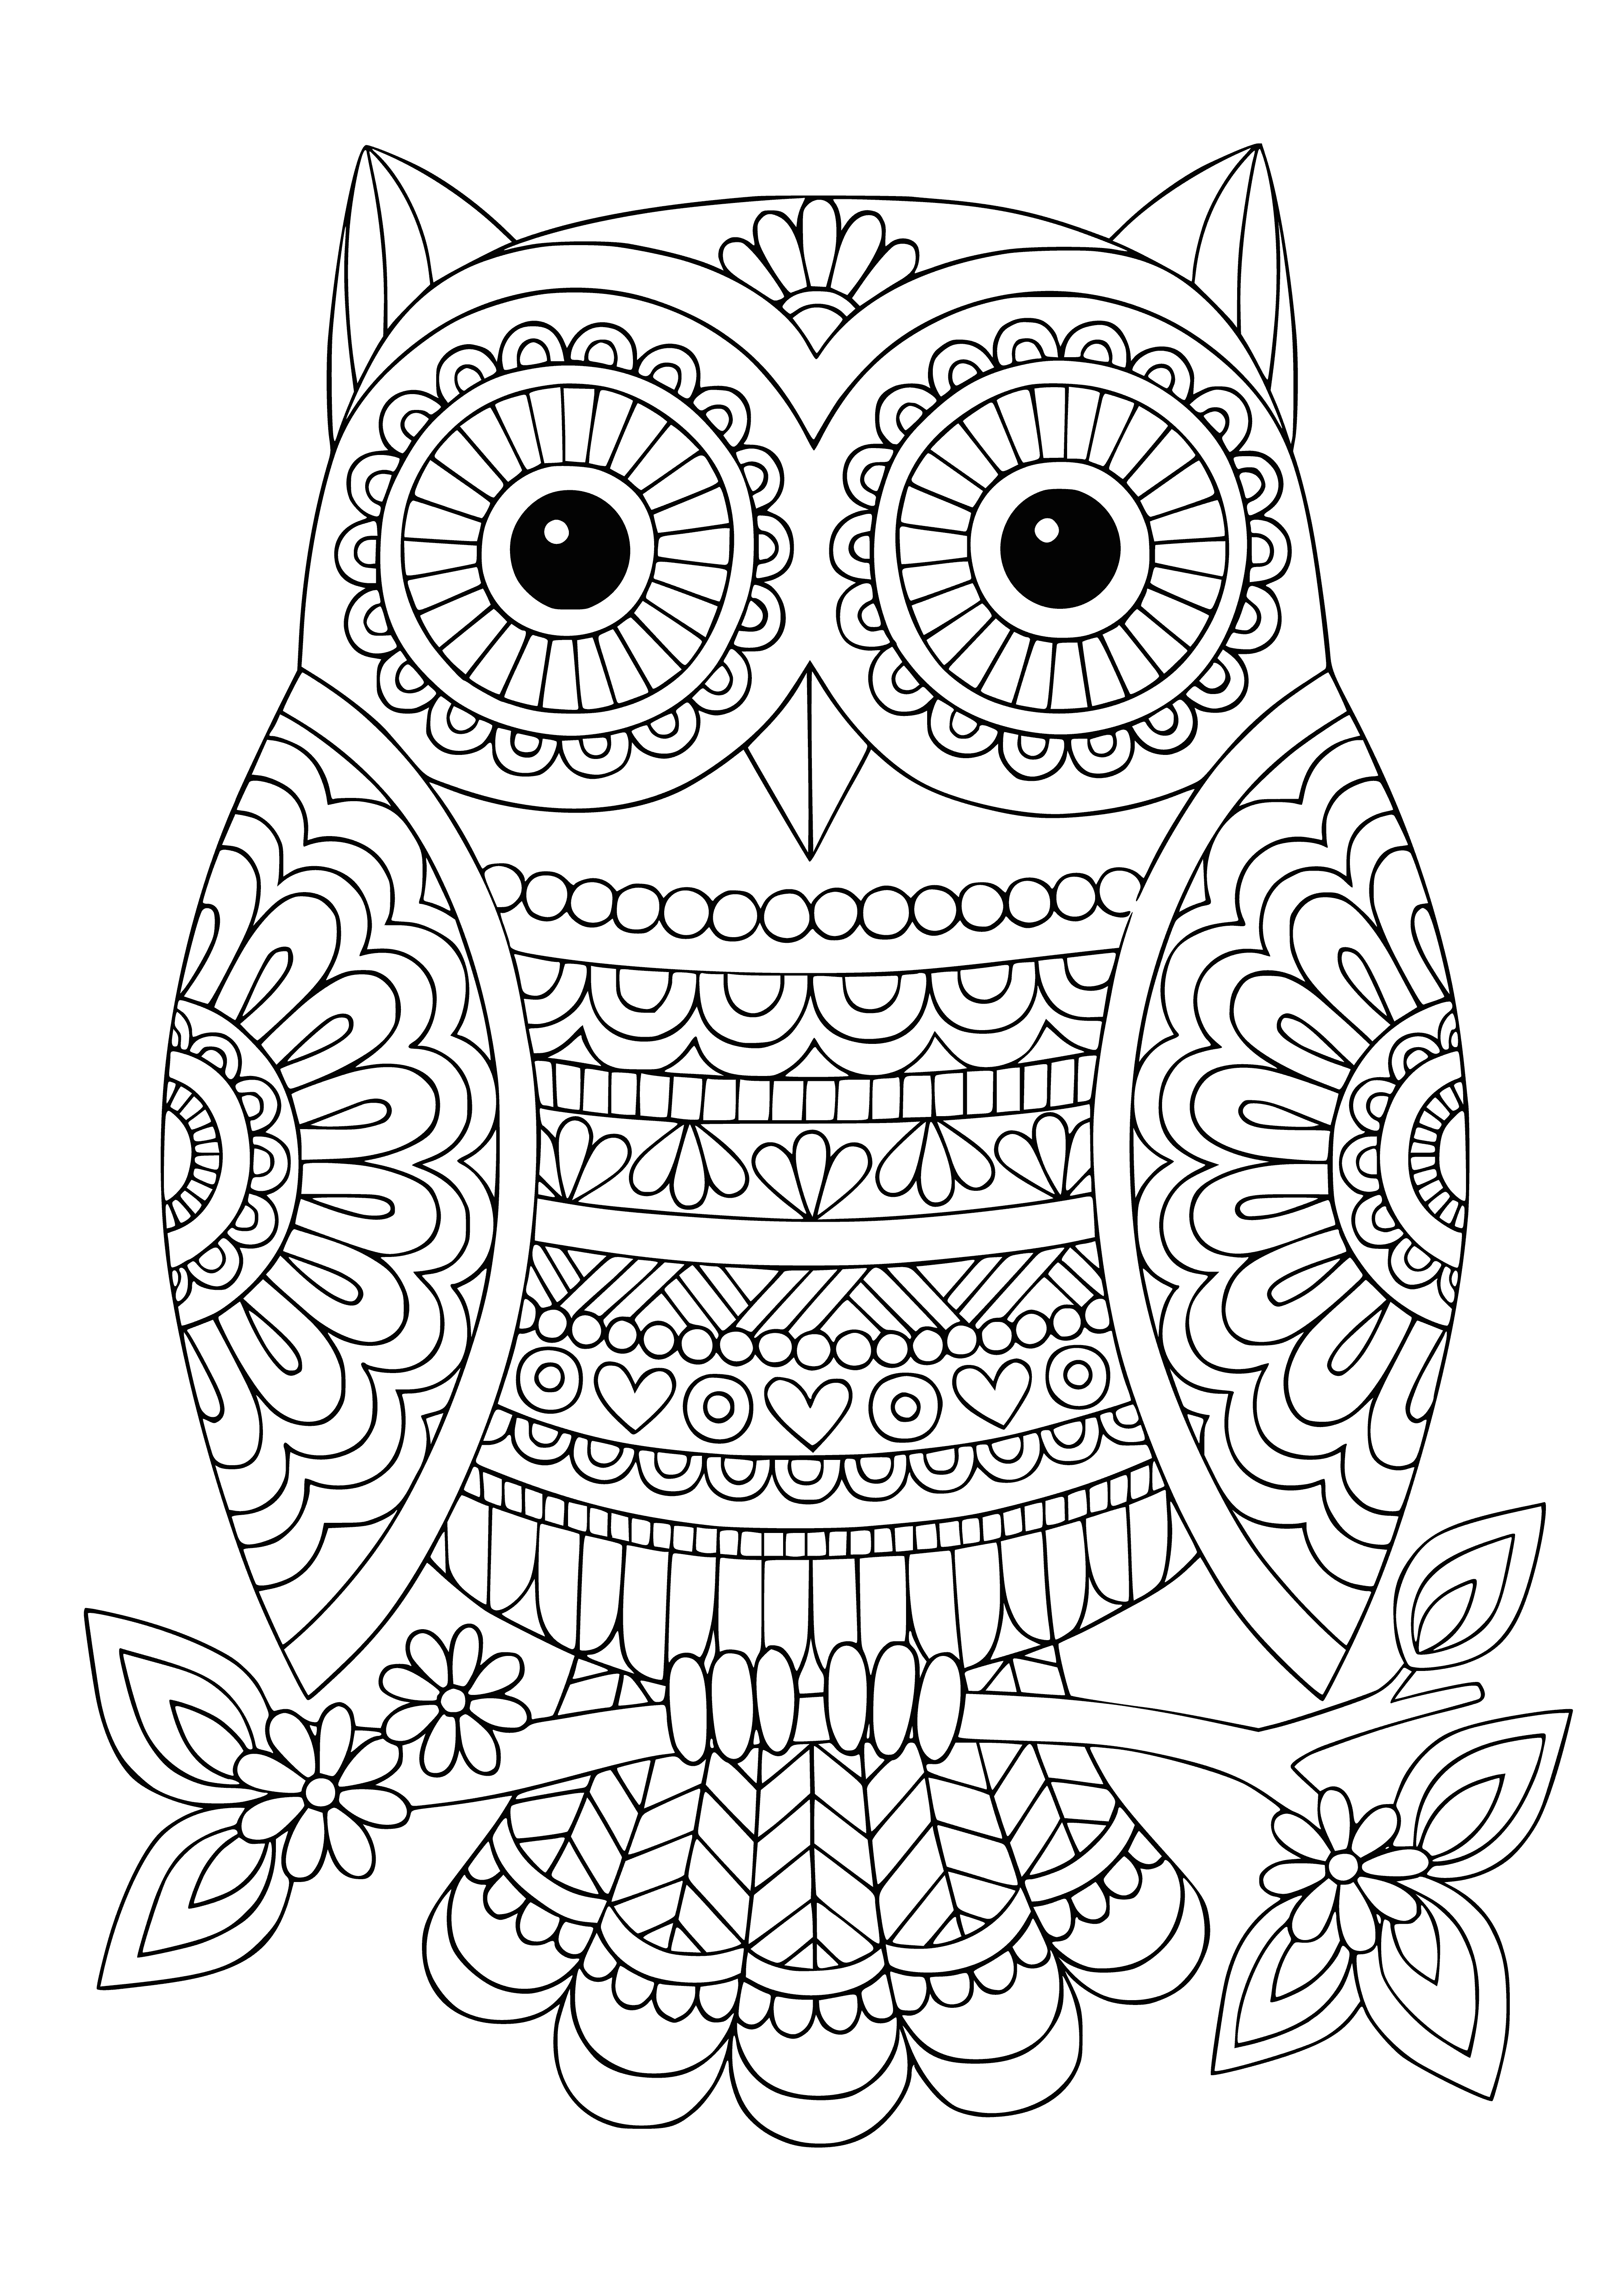 Owl on a branch coloring page